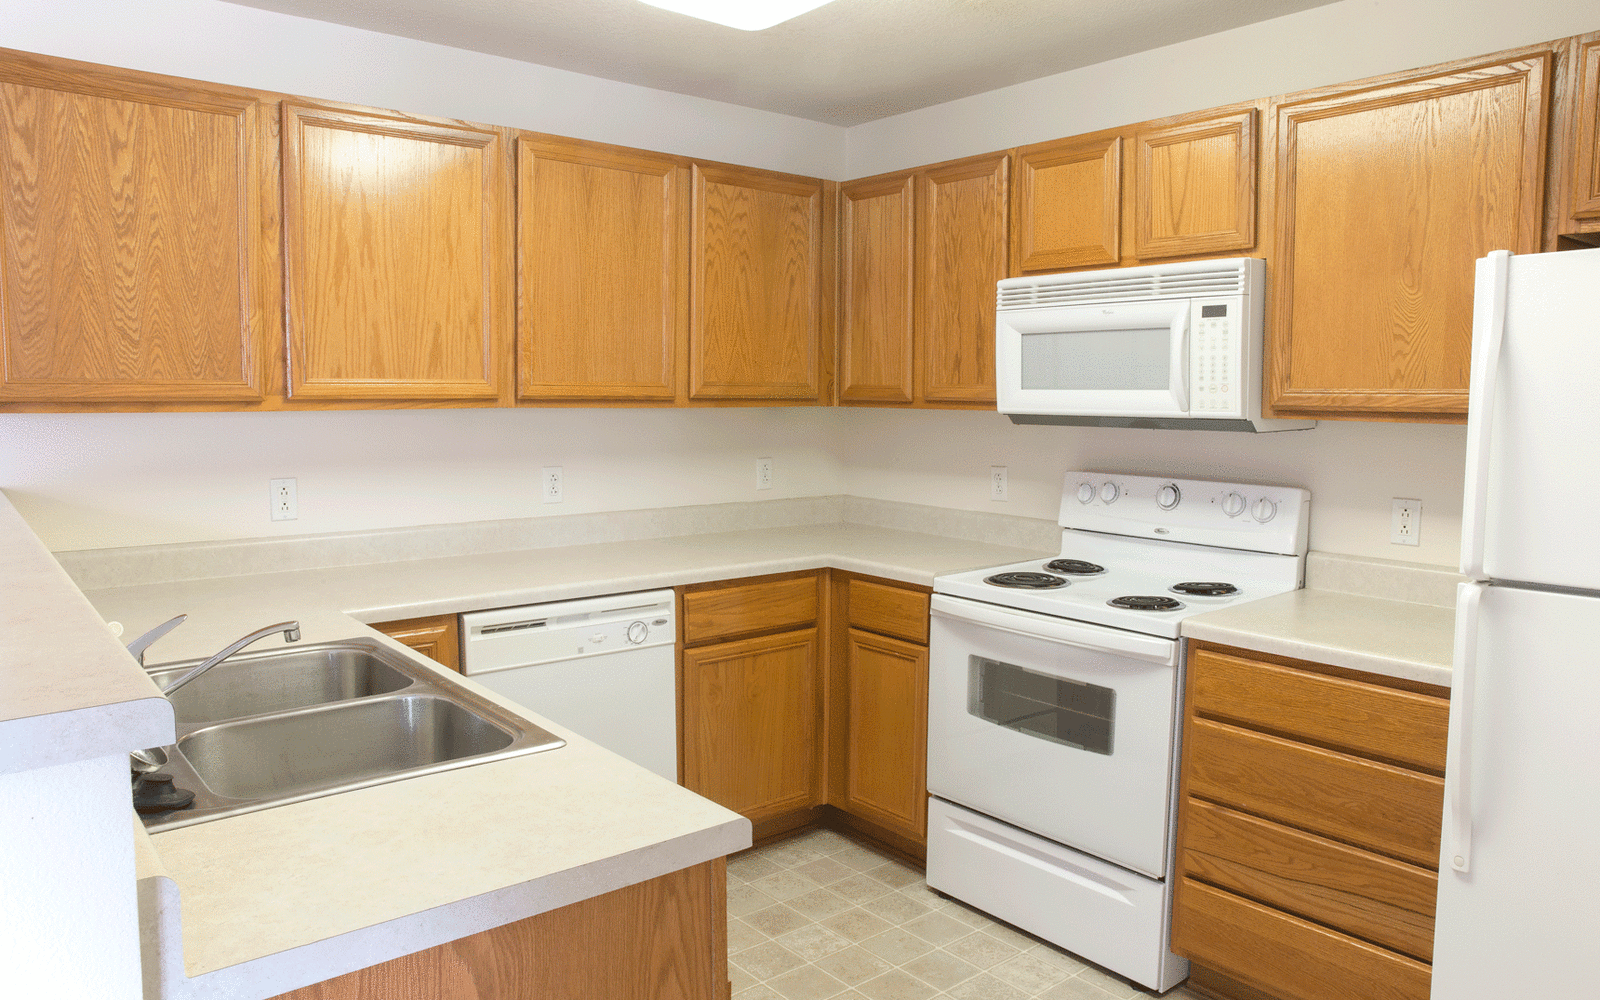 Three bedroom apartment kitchen at West Towne in Ames, Iowa